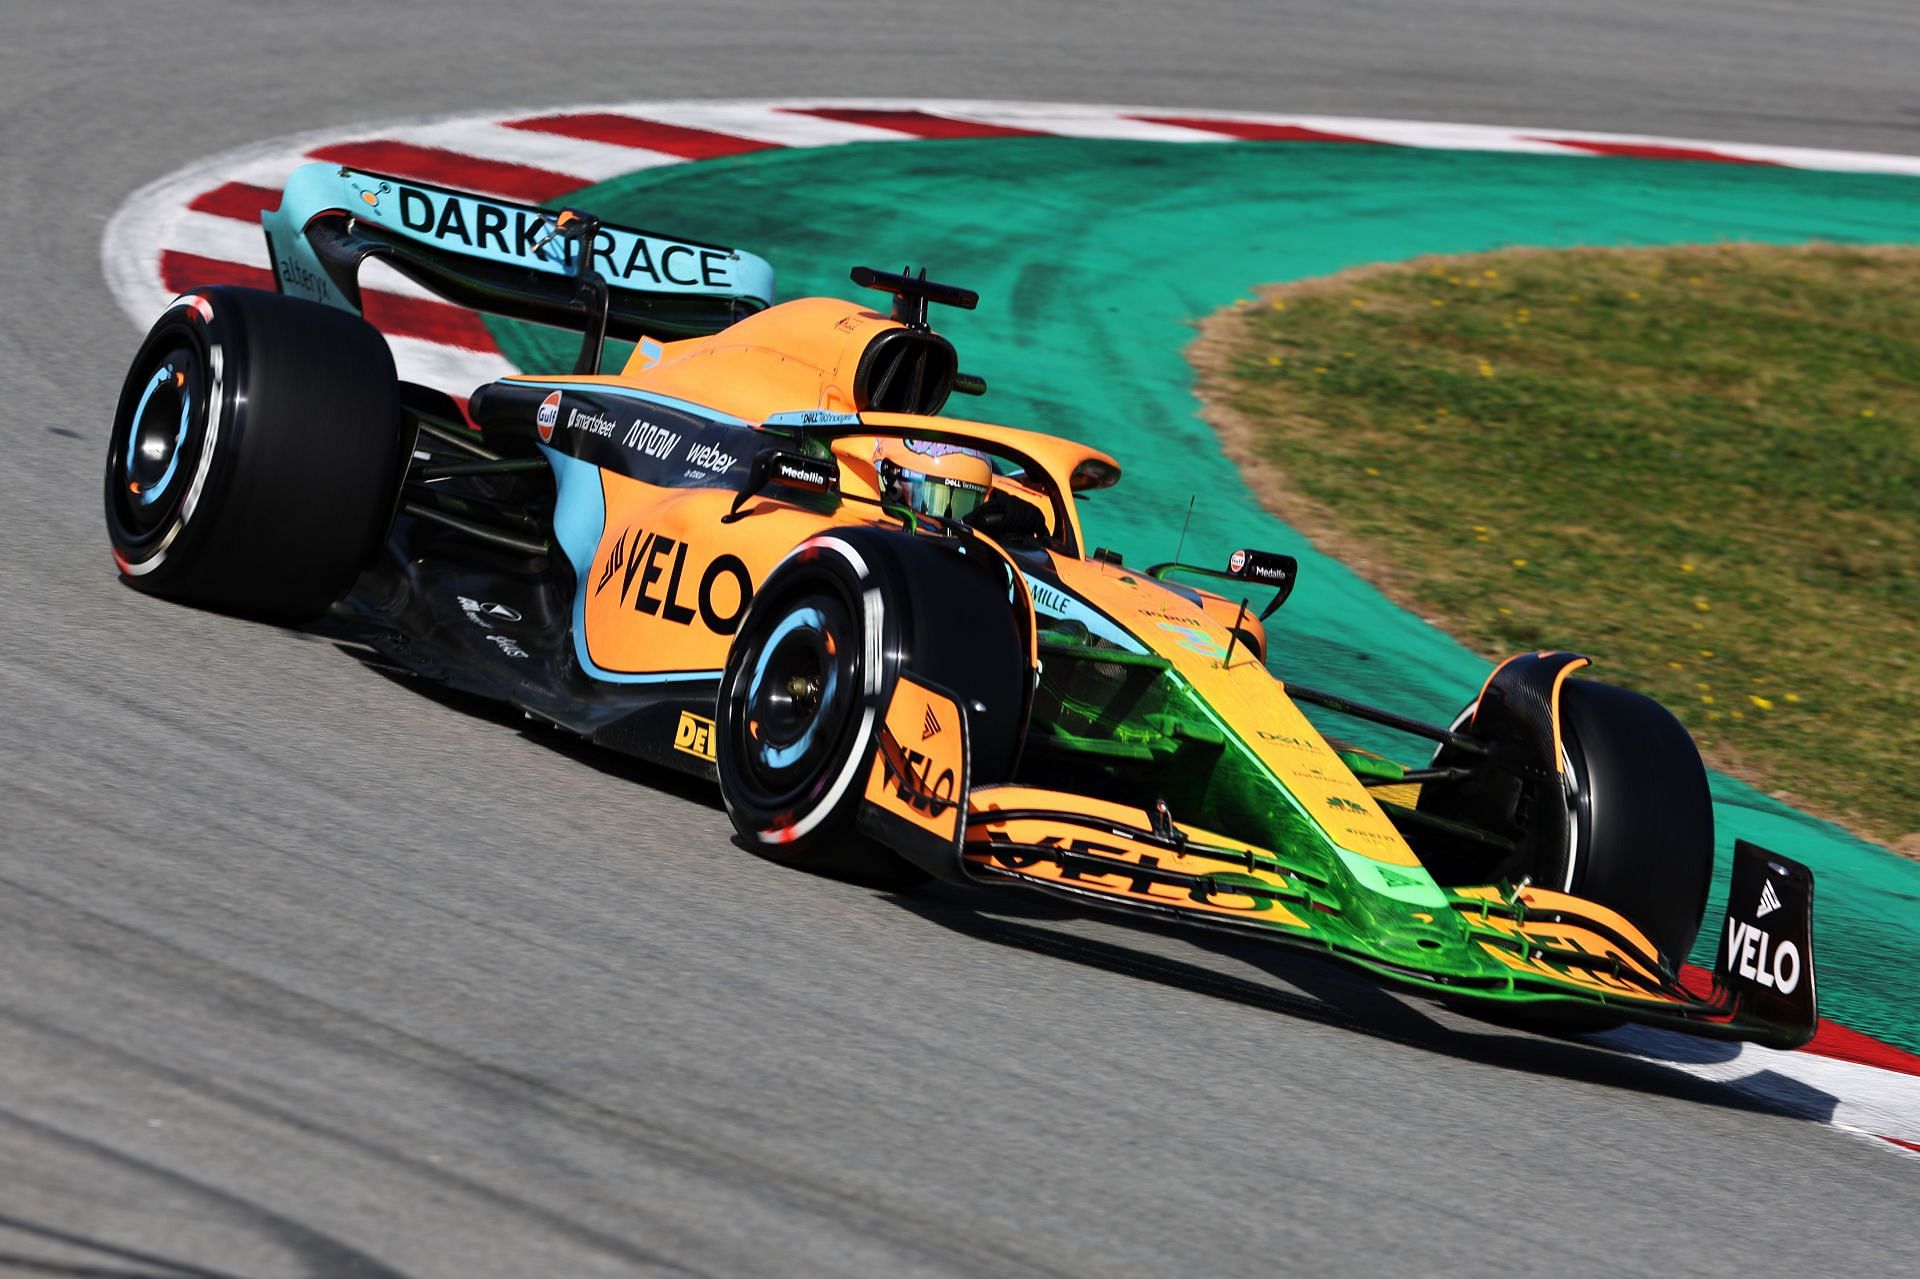 Daniel Ricciardo driving the (3) McLaren MCL36 with Flow-vis paint on the nose area, in Barcelona, Spain. (Photo by Mark Thompson/Getty Images)